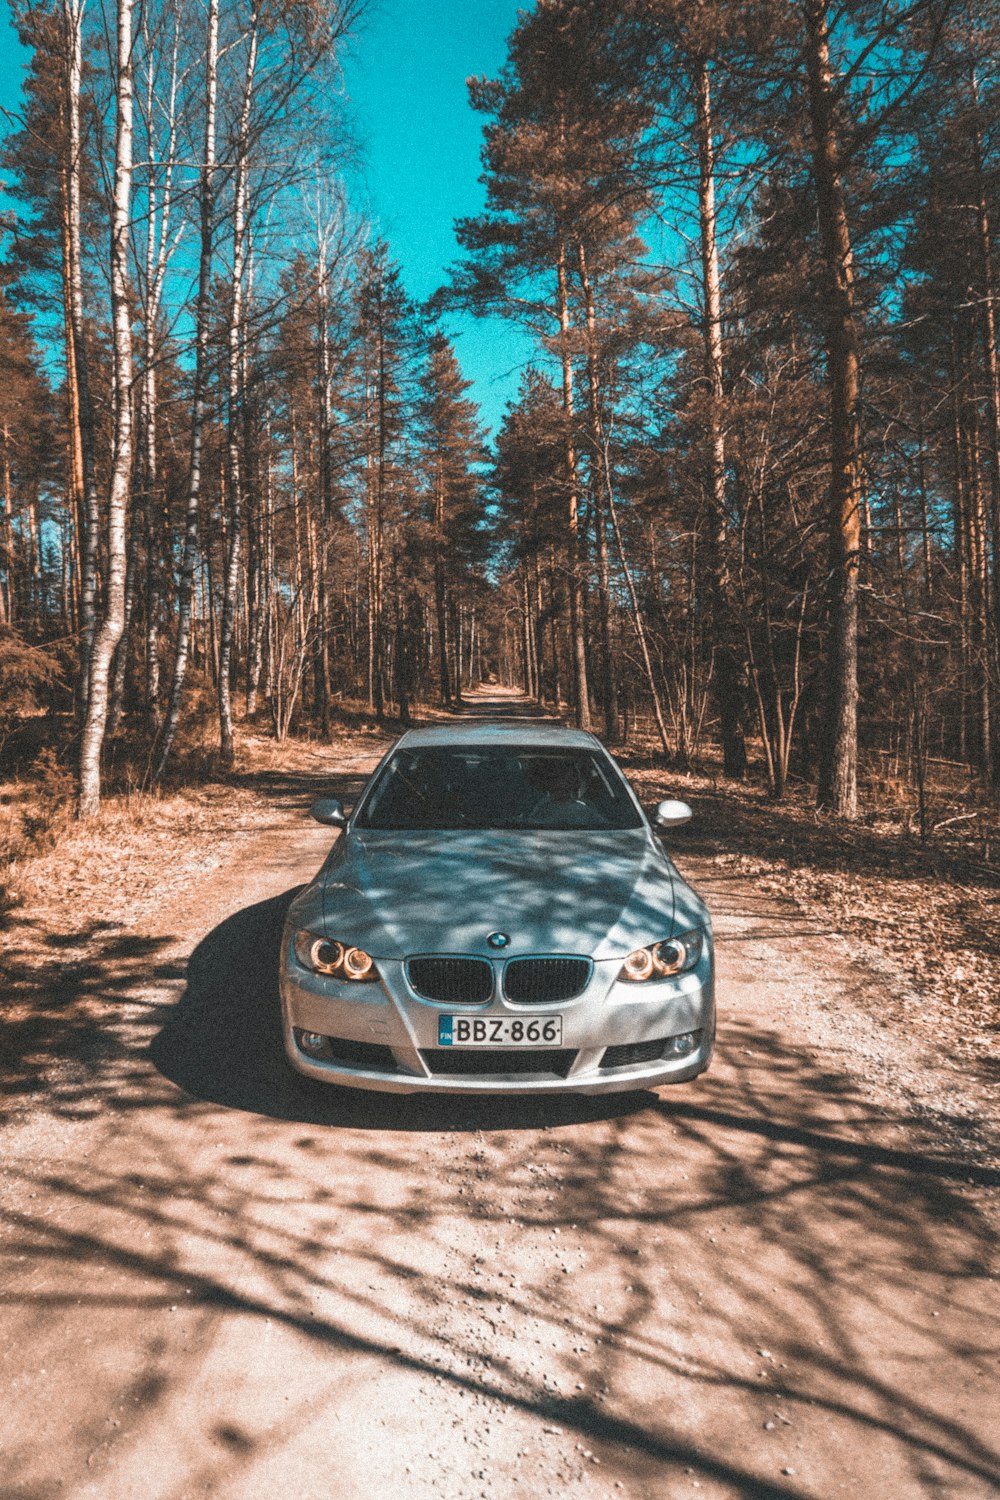 black bmw m 3 parked on brown dirt road in between trees during daytime